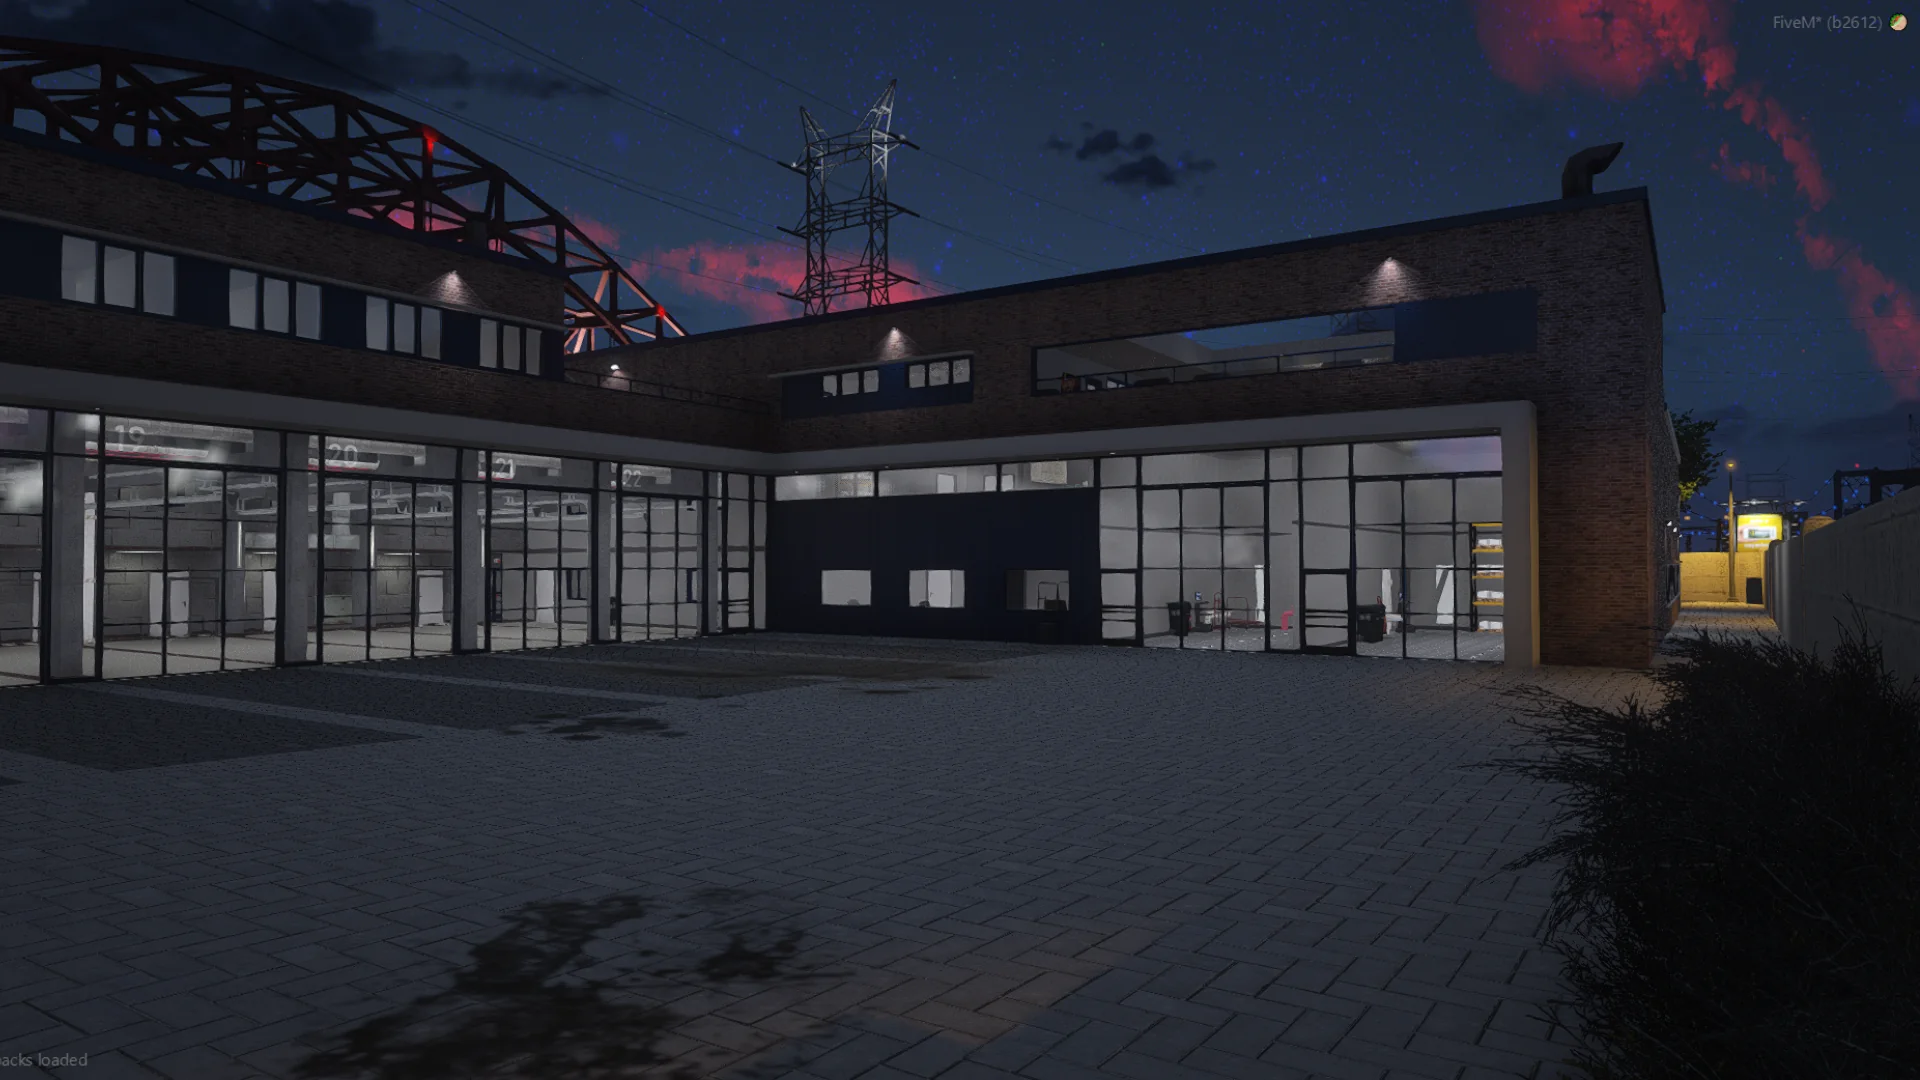 More information about "[MLO] Feuerwehrwache Hannover - Hannover Fire Station"